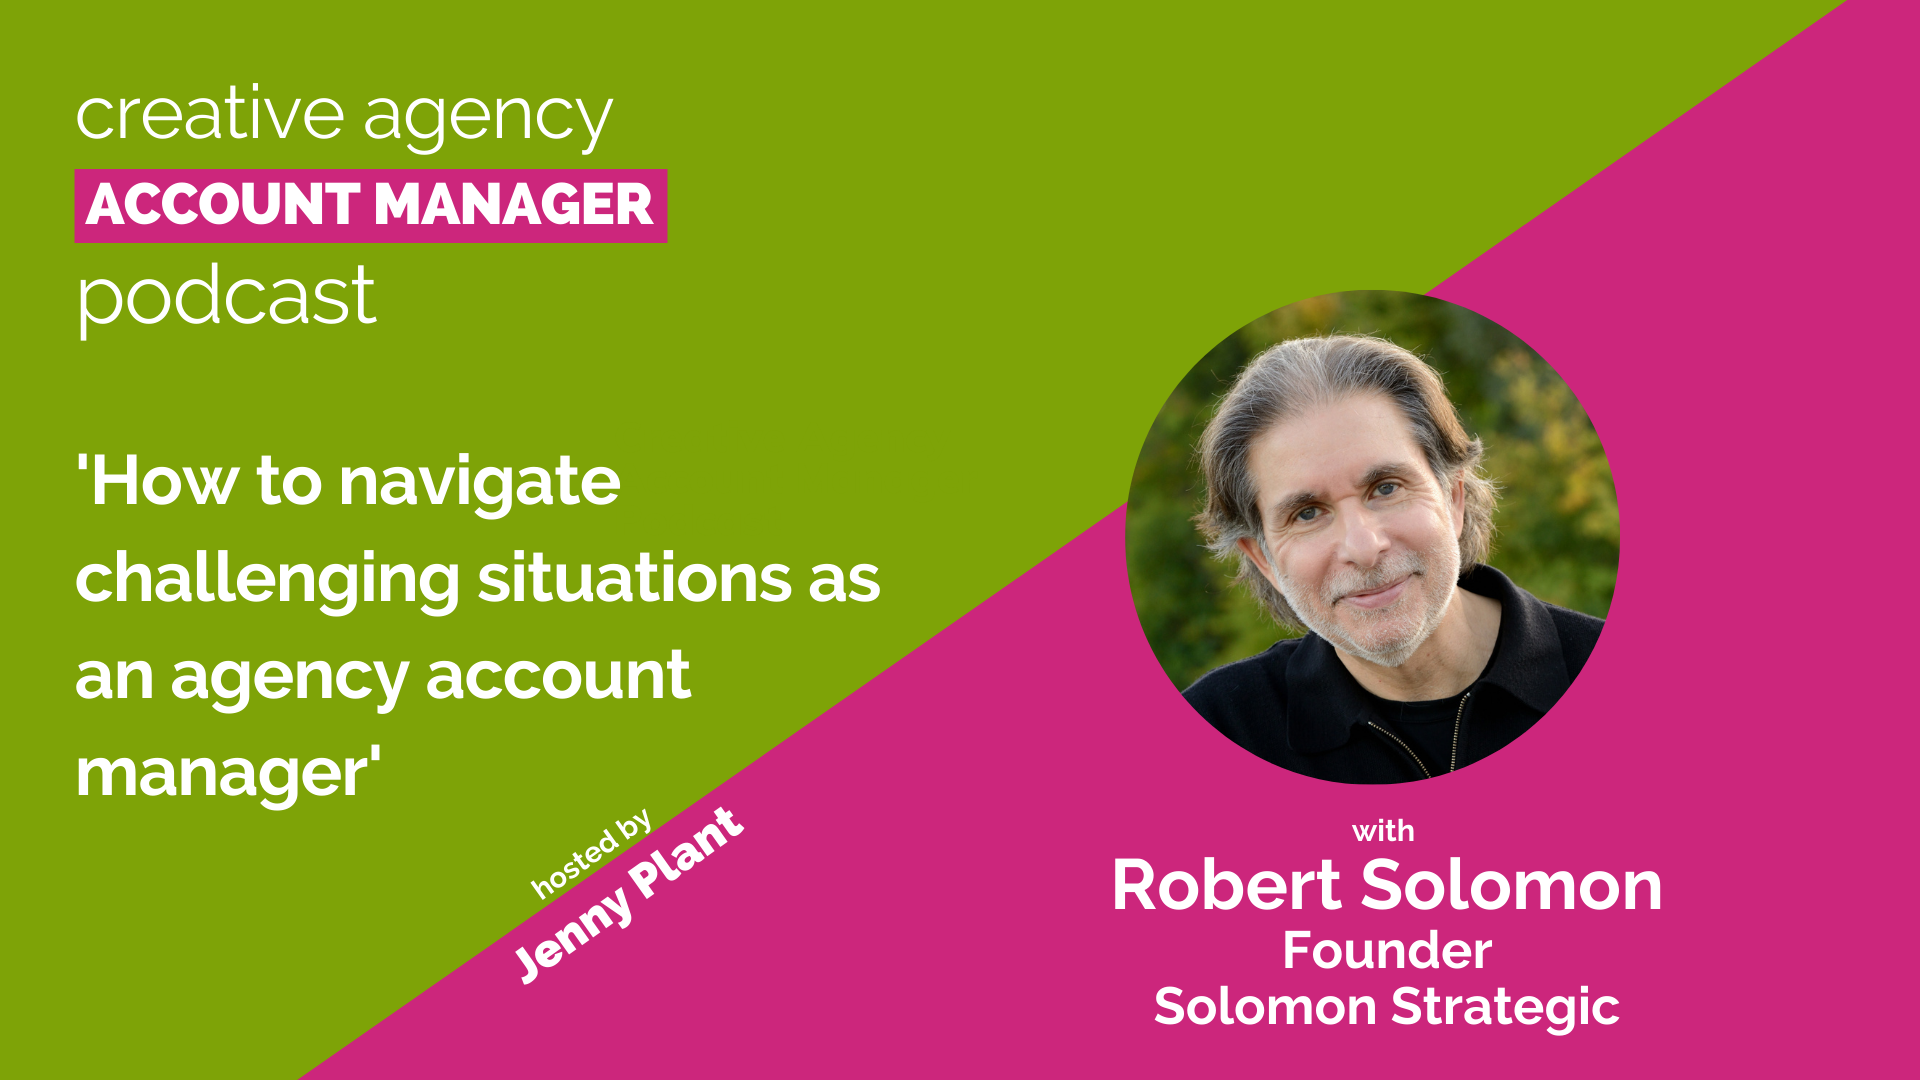 How to navigate challenging situations as a agency account manager, with Robert Solomon